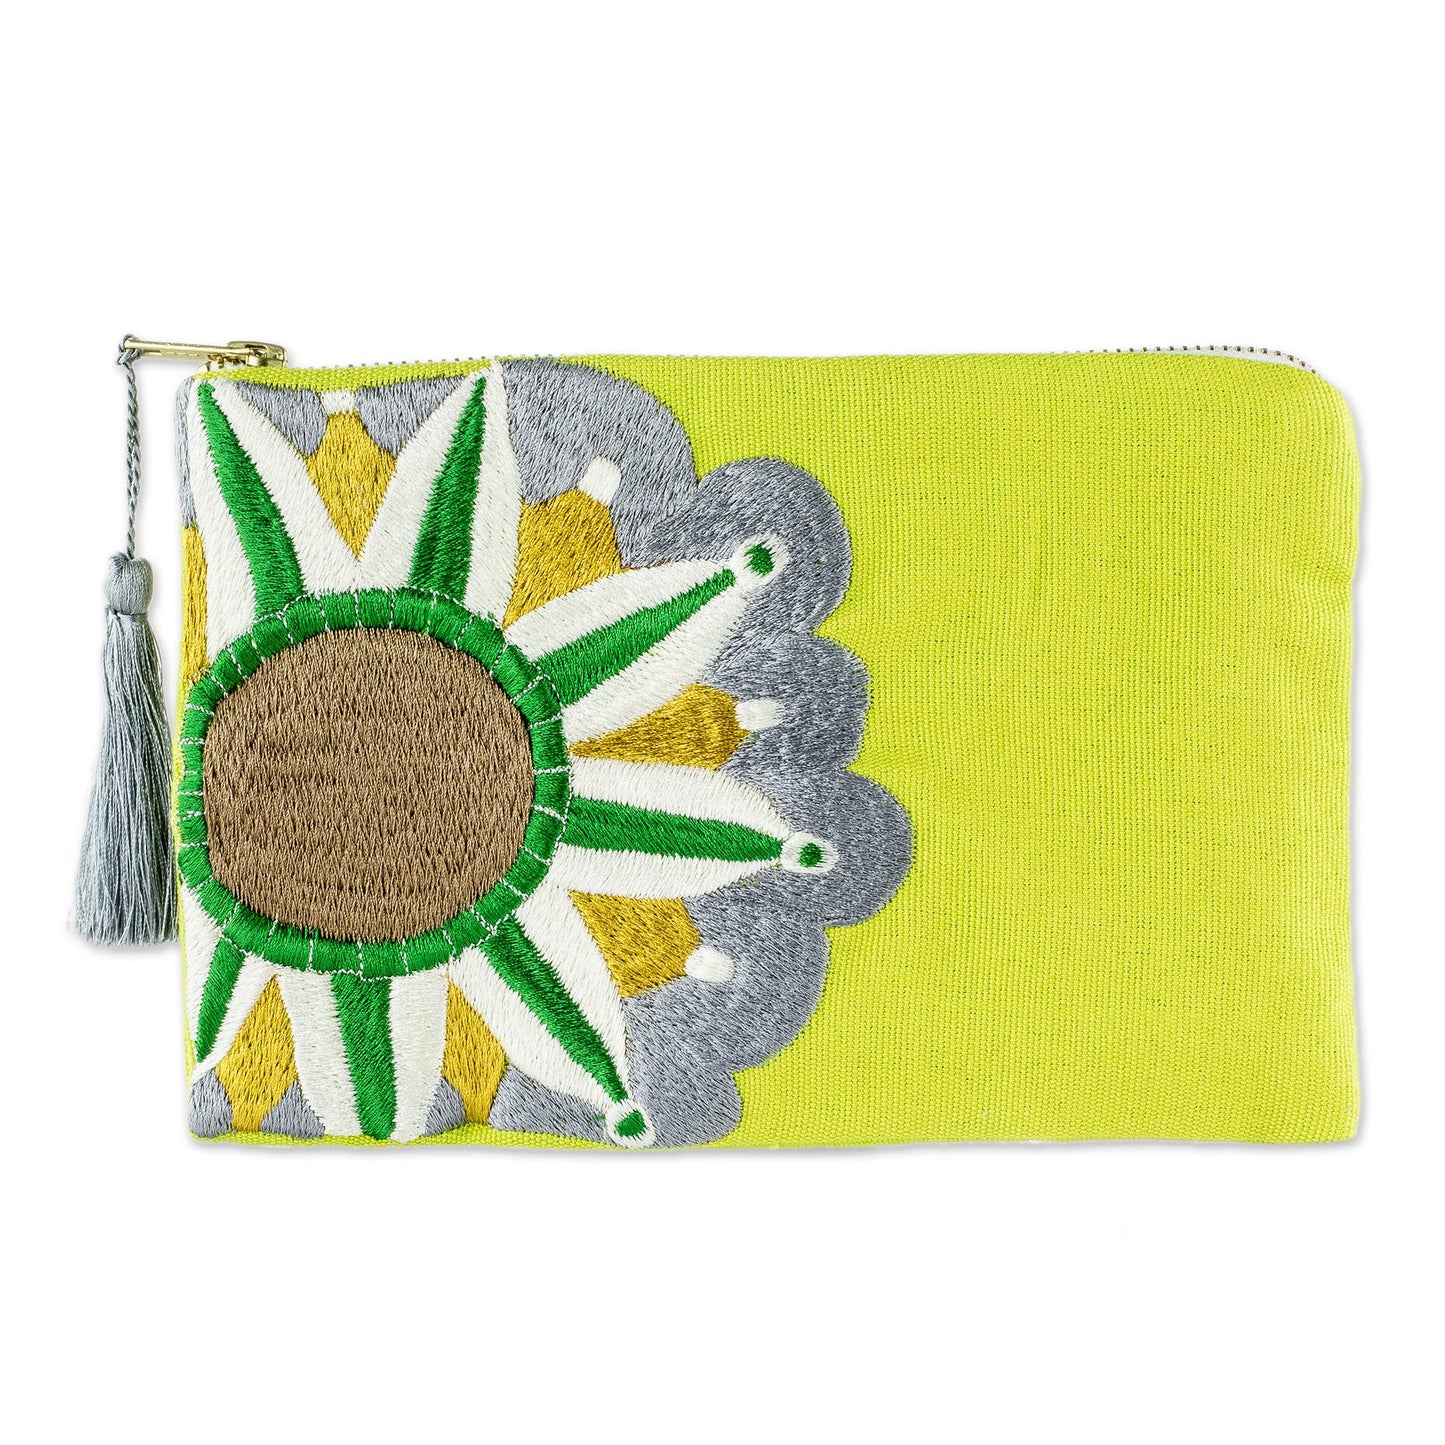 Golden Lime Sunshine Sun Motif Embroidered Chartreuse Cotton Cosmetic Bag